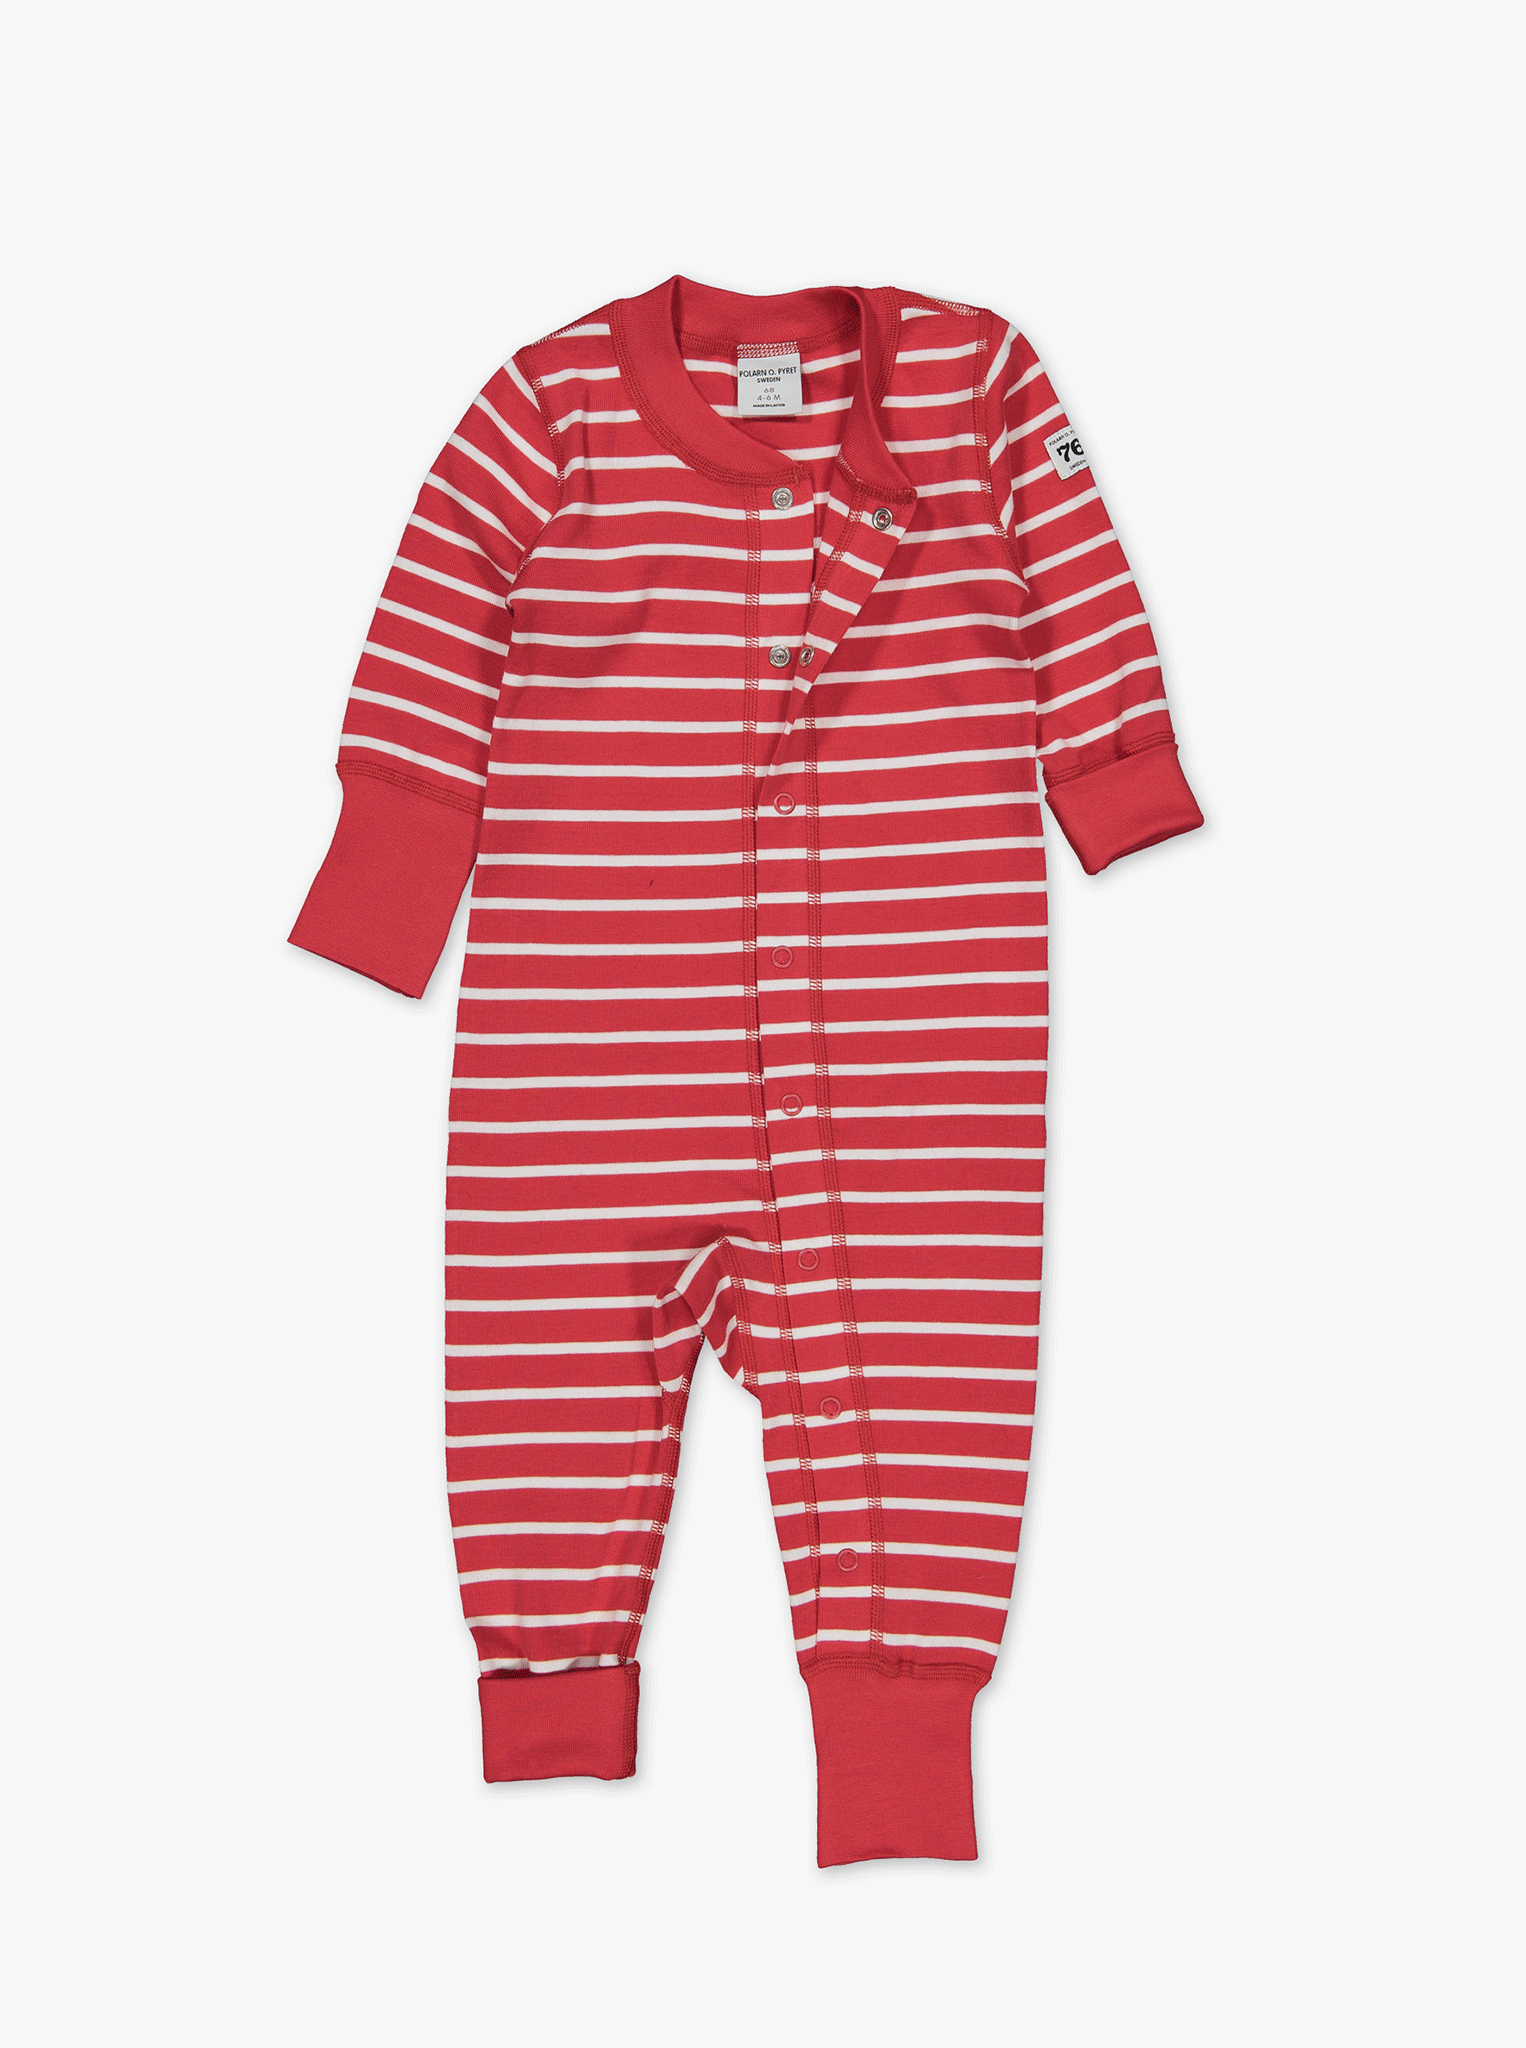 PO.P Stripe Baby All-In-One Red Unisex Preterm-2y